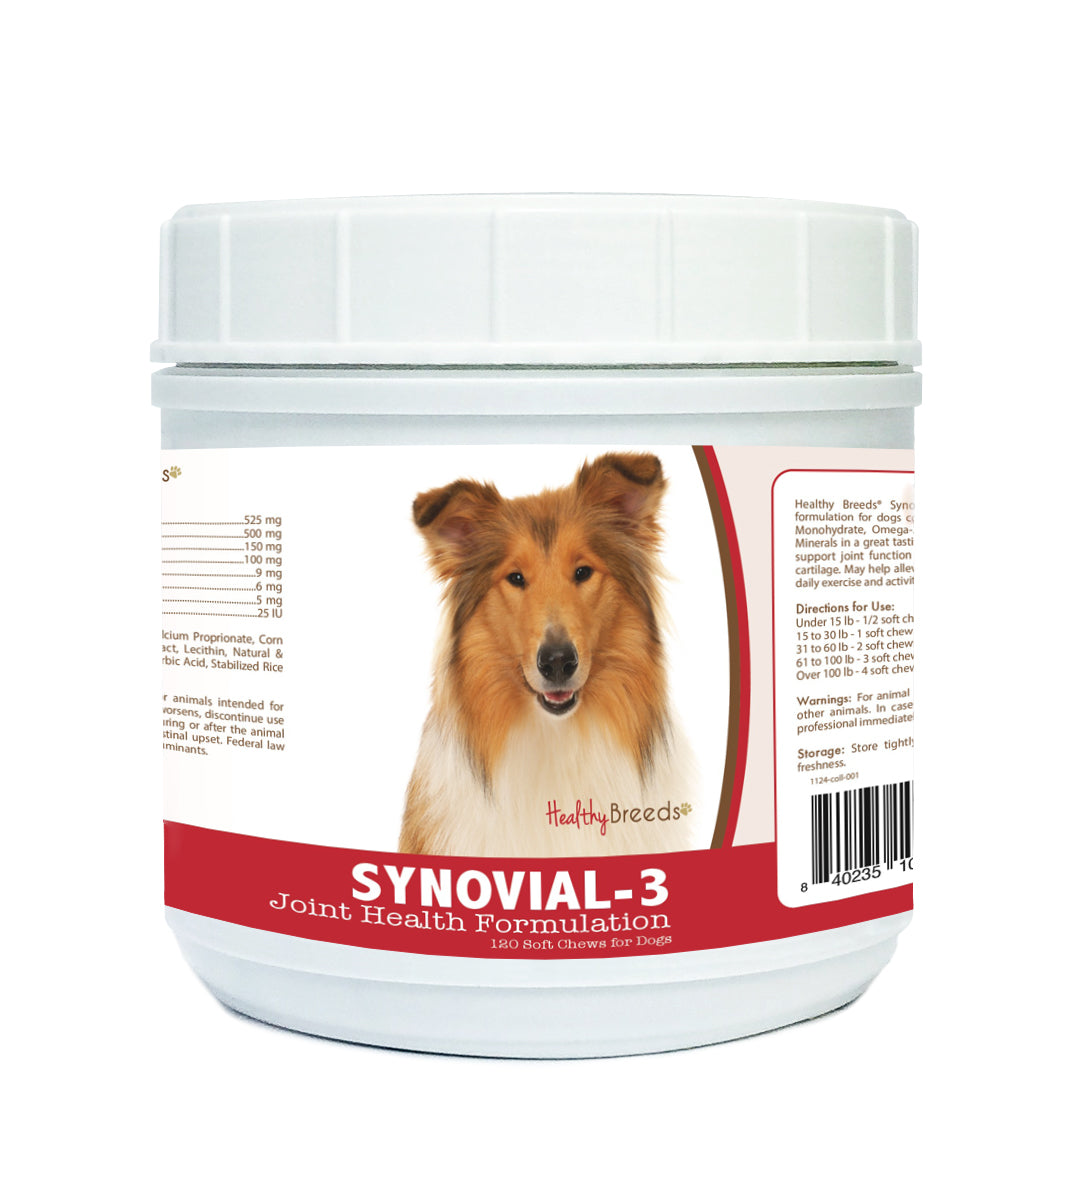 Collie Synovial-3 Joint Health Formulation Soft Chews 120 Count